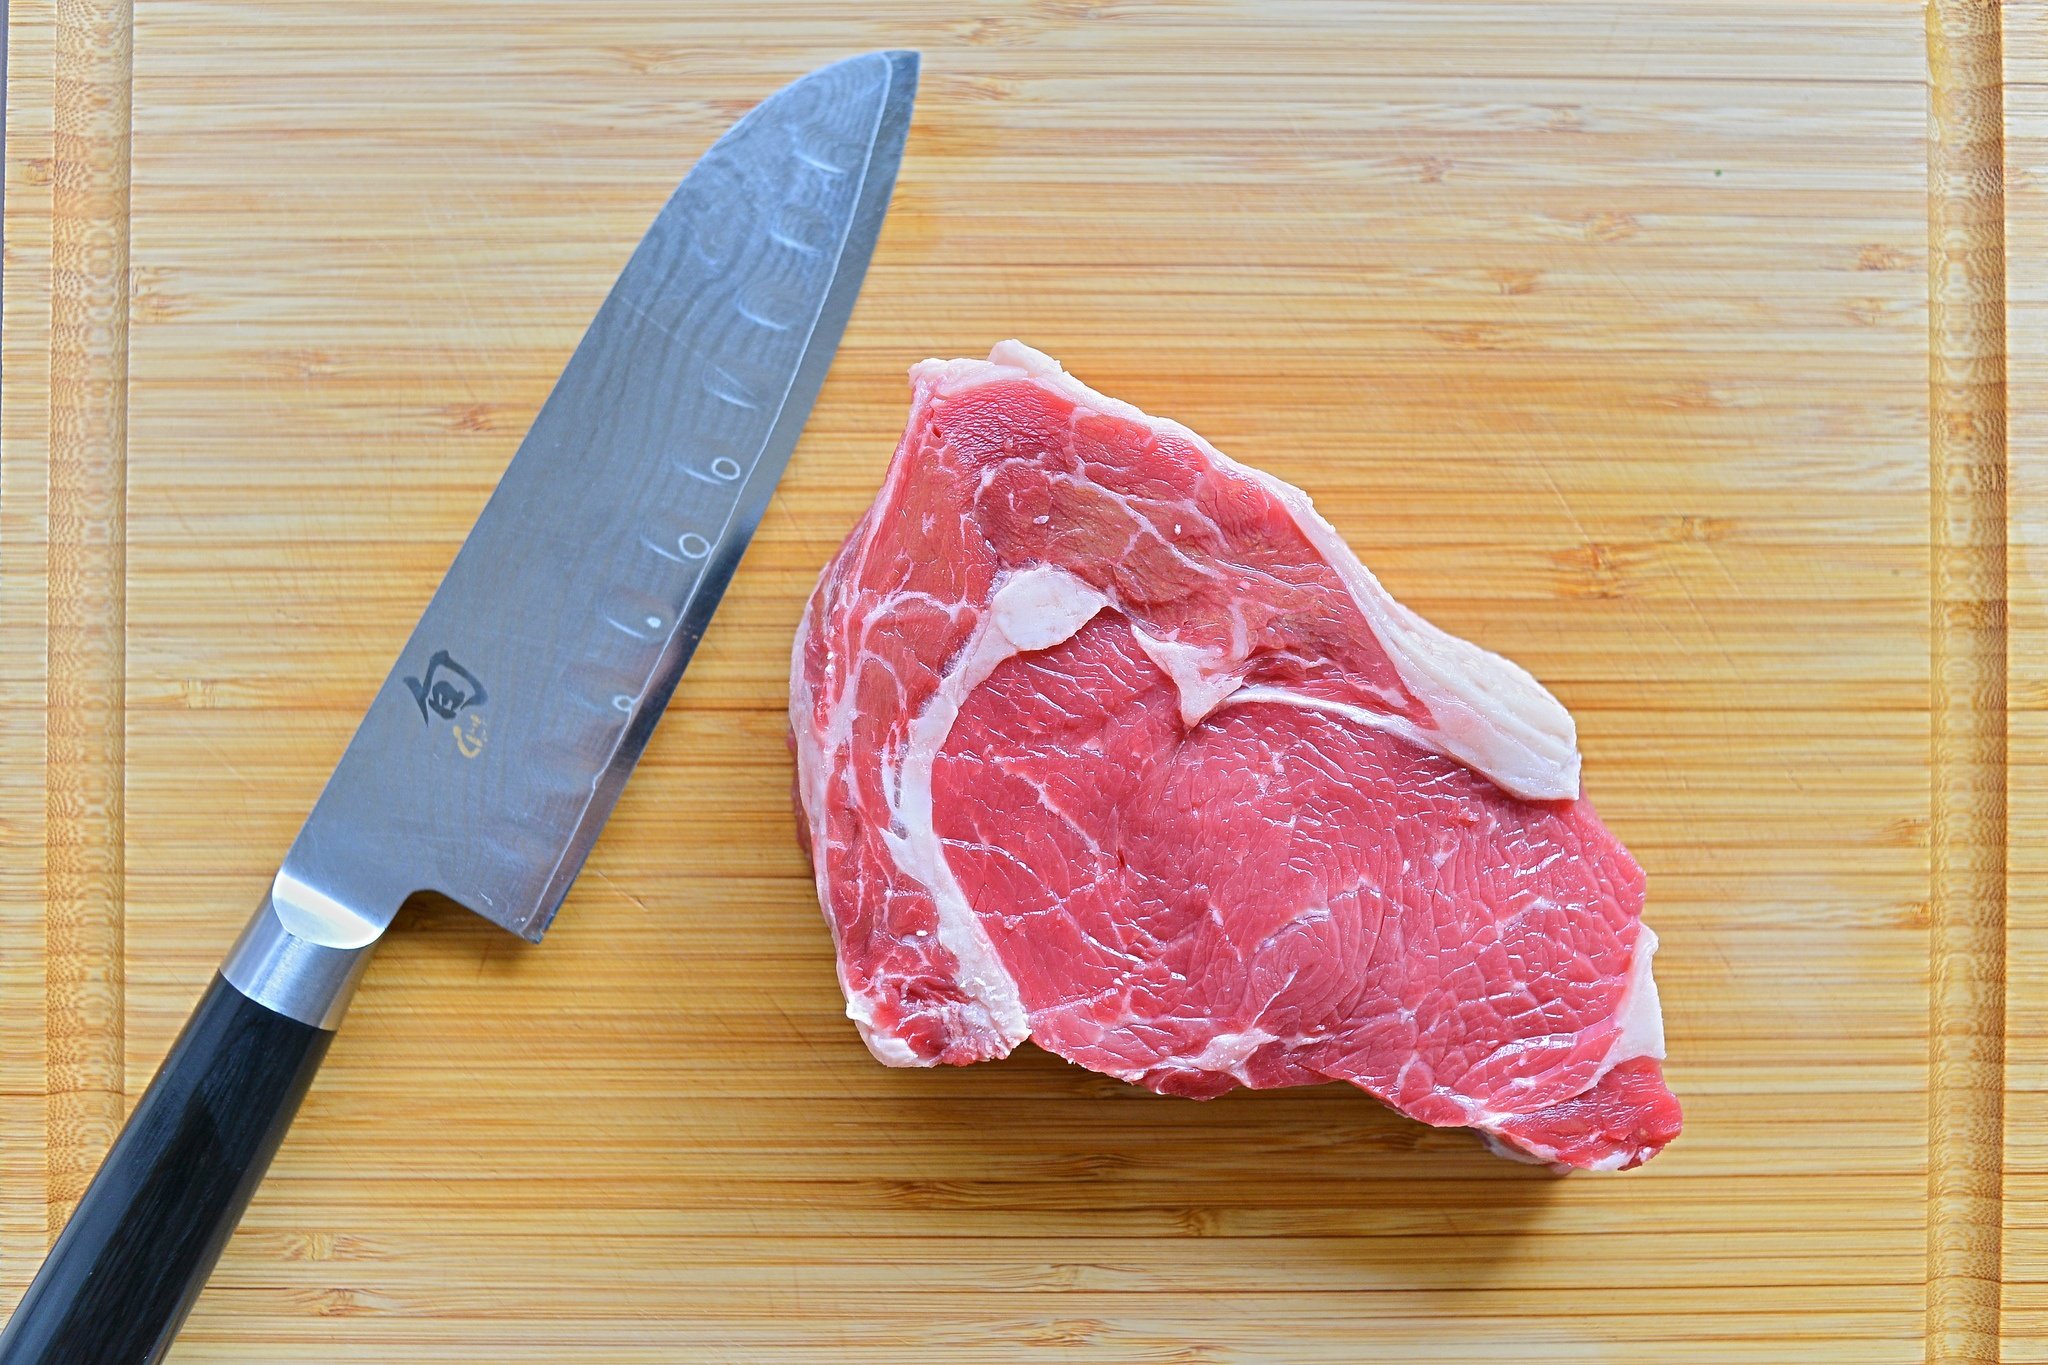 What you need to know about the recent red meat/cancer report